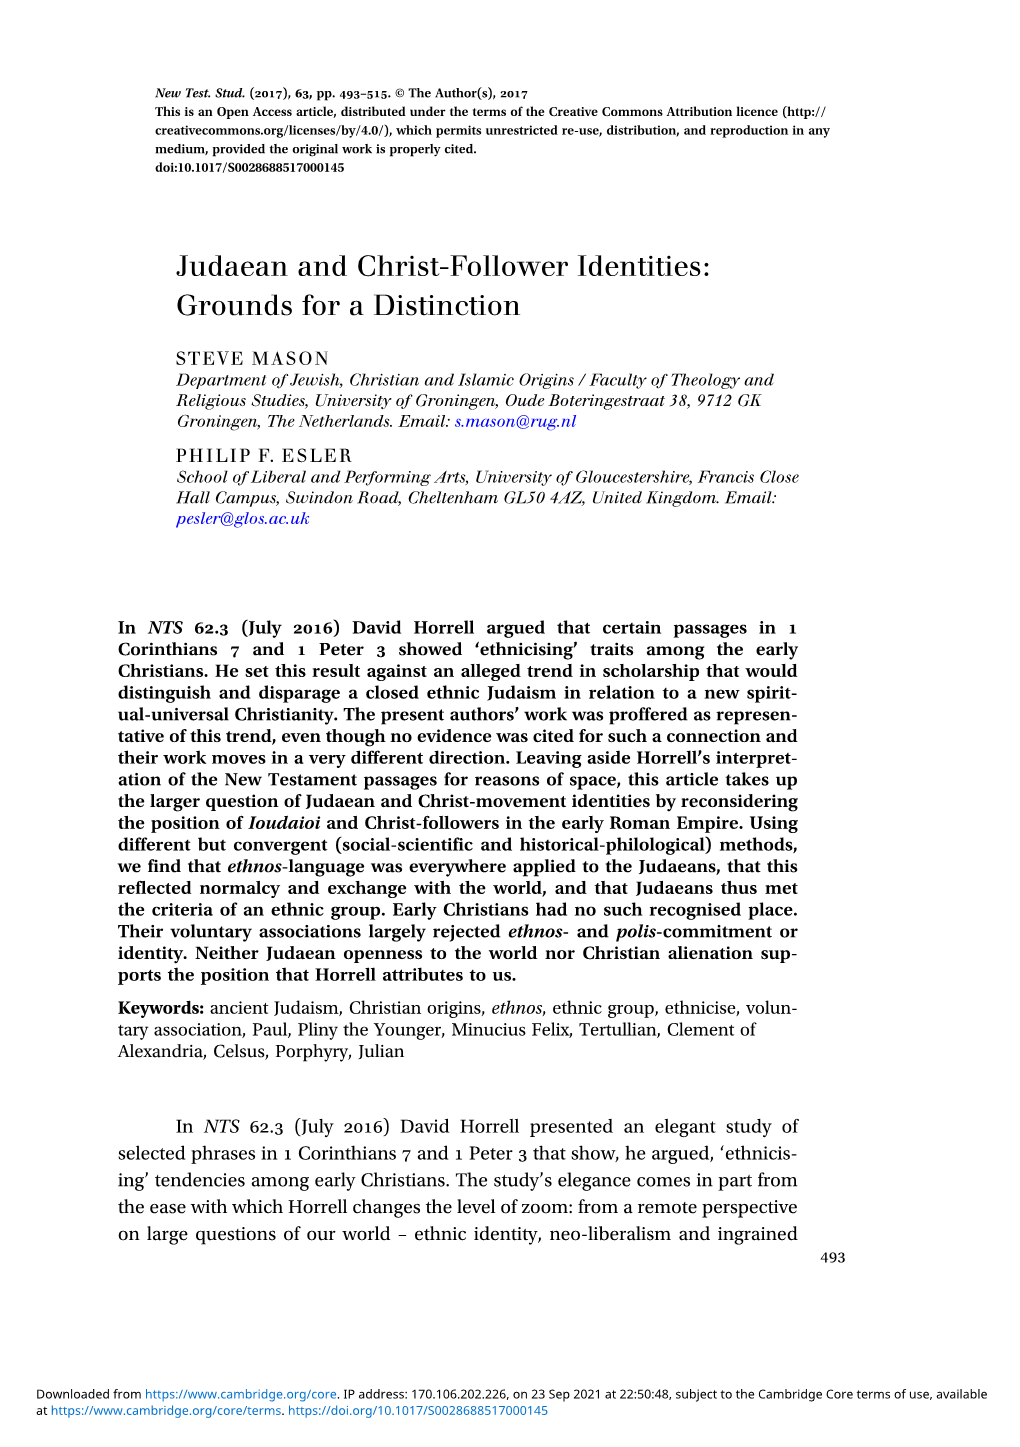 Judaean and Christ-Follower Identities: Grounds for a Distinction